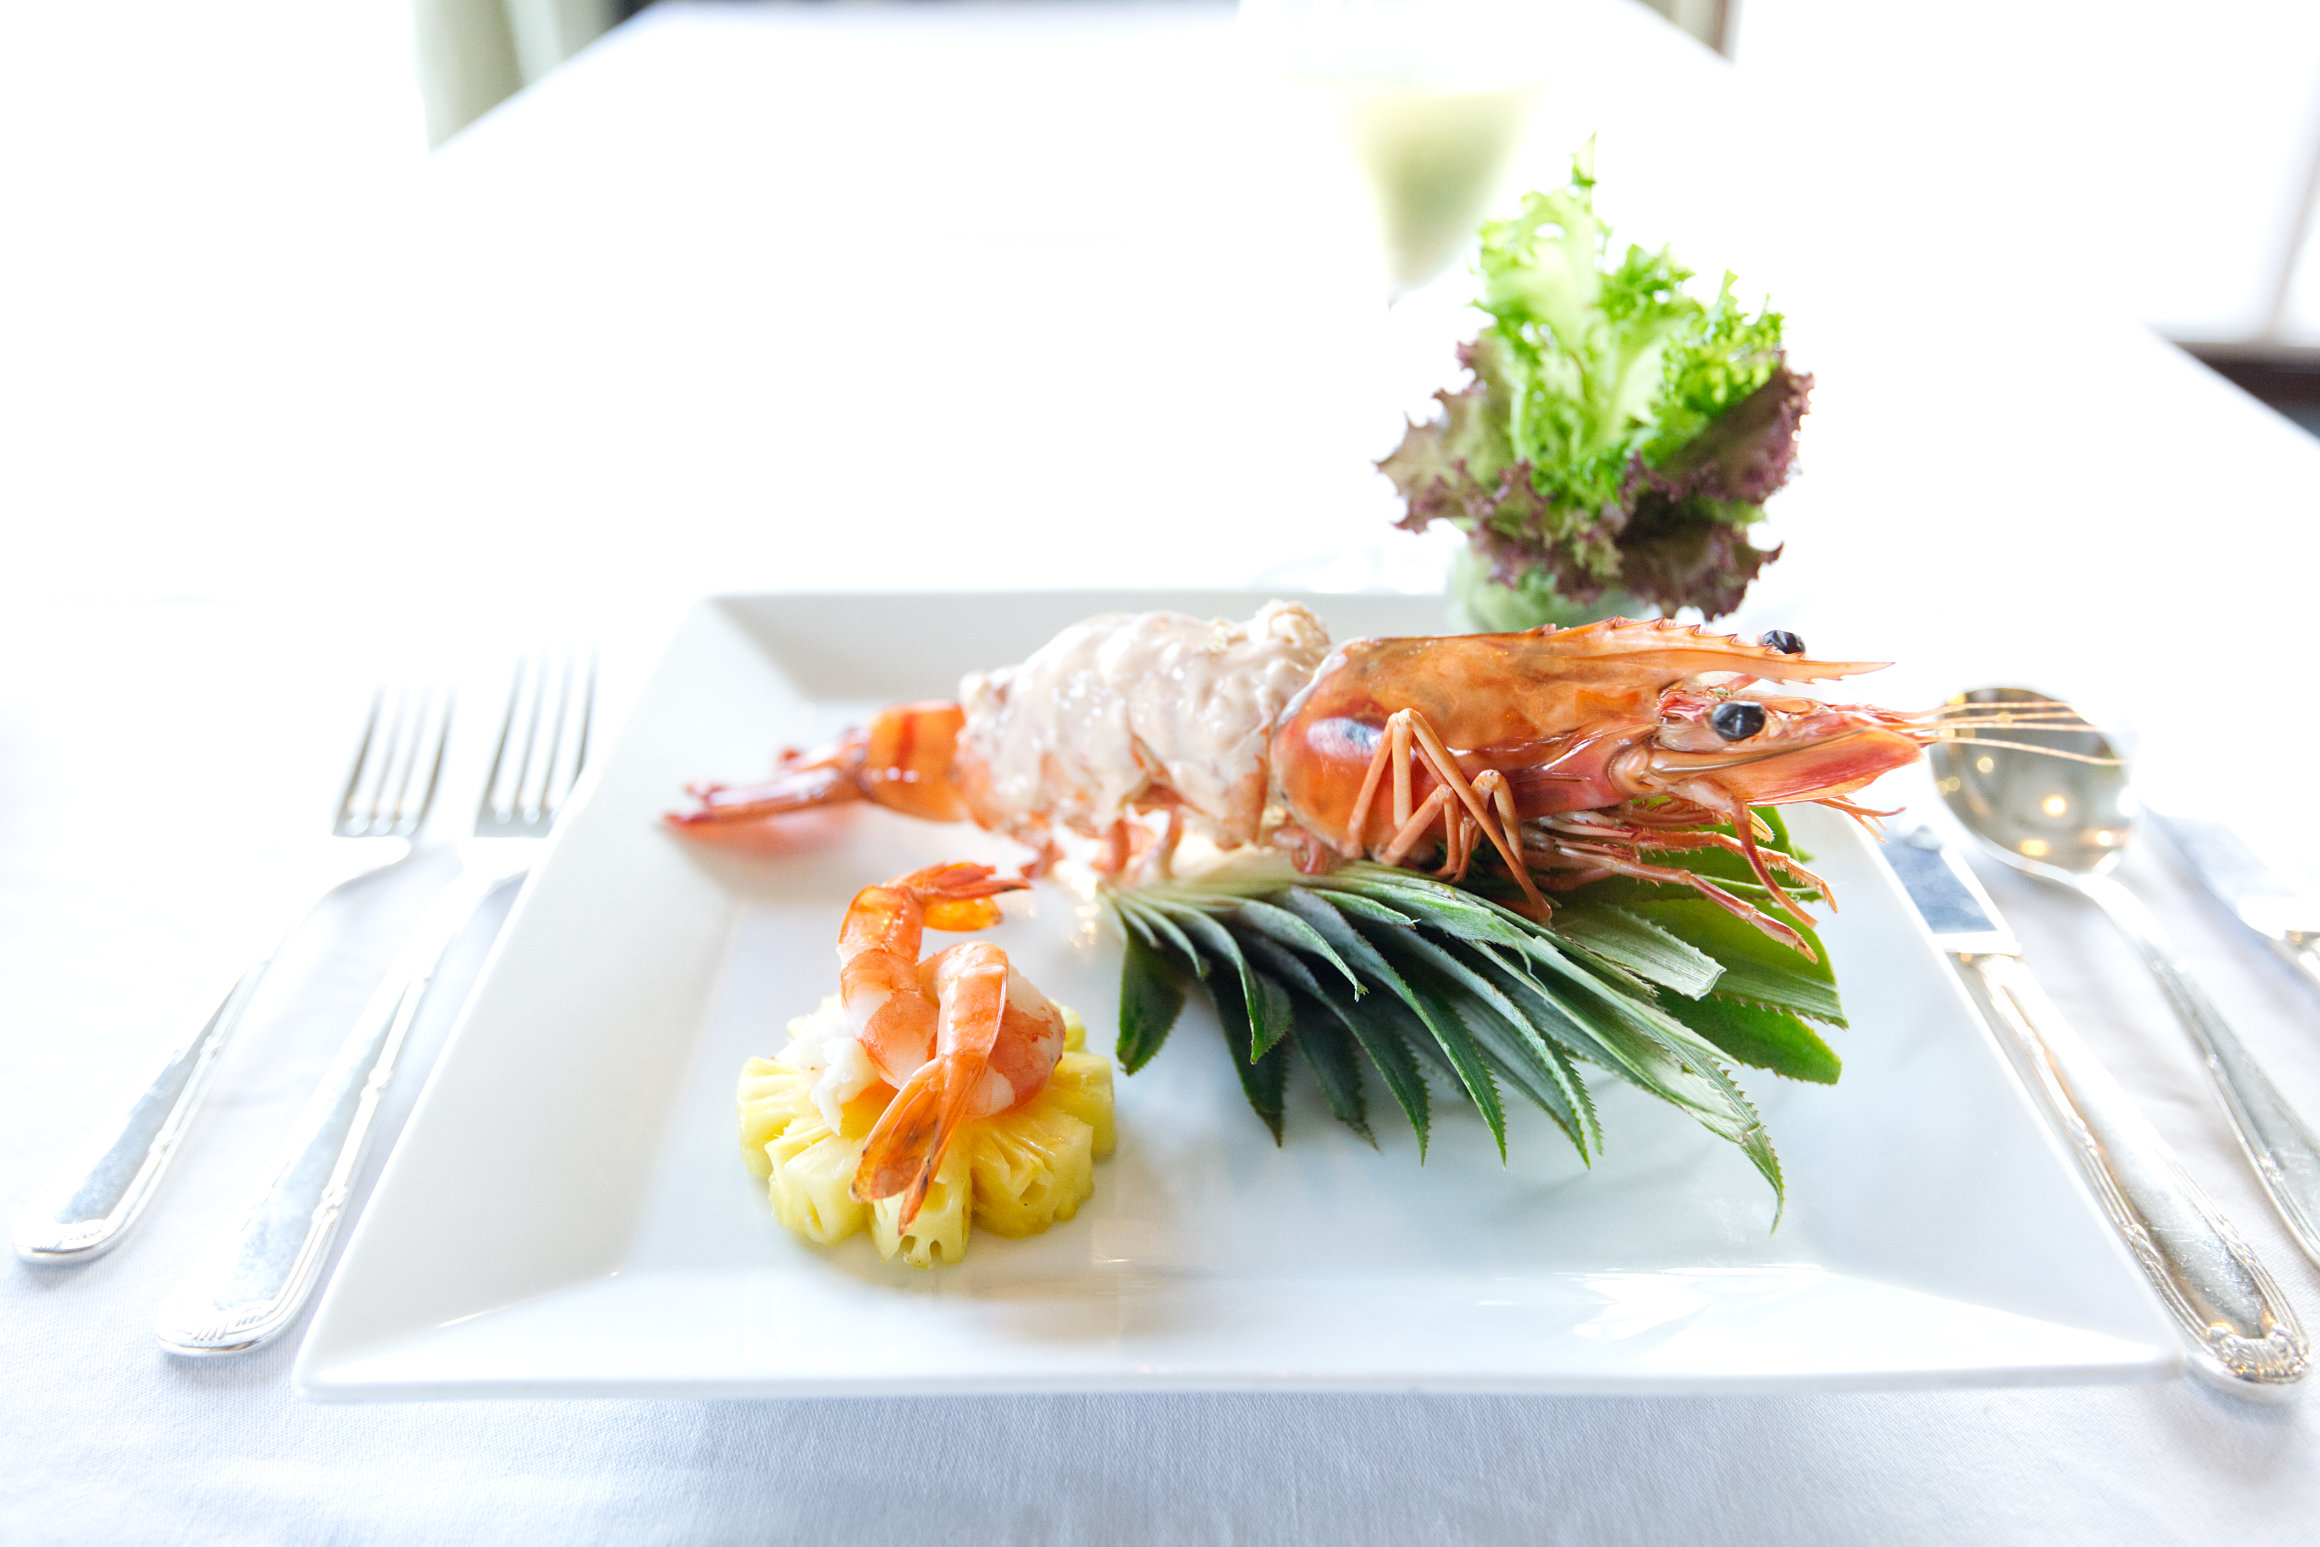 Khmer lobster dish - Cambodian luxury food